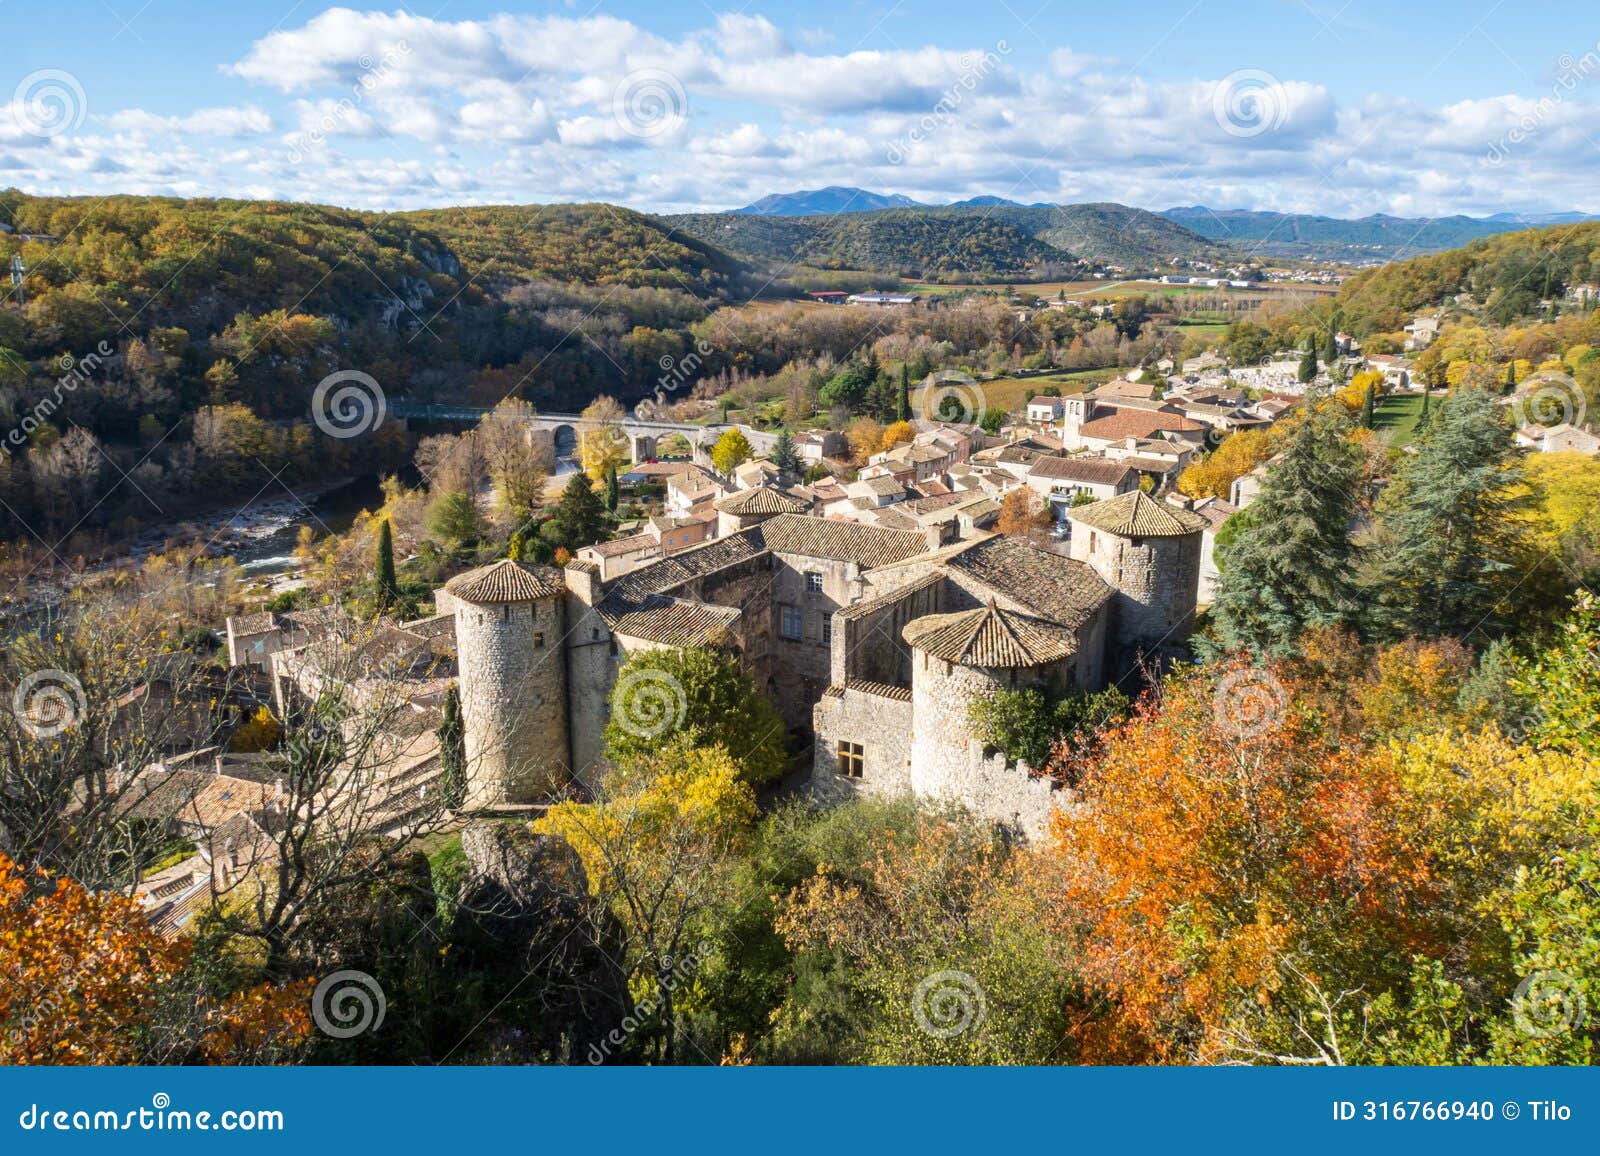 view over the roofs of the village of vogÃÂ¼ÃÂ©. photography taken in france